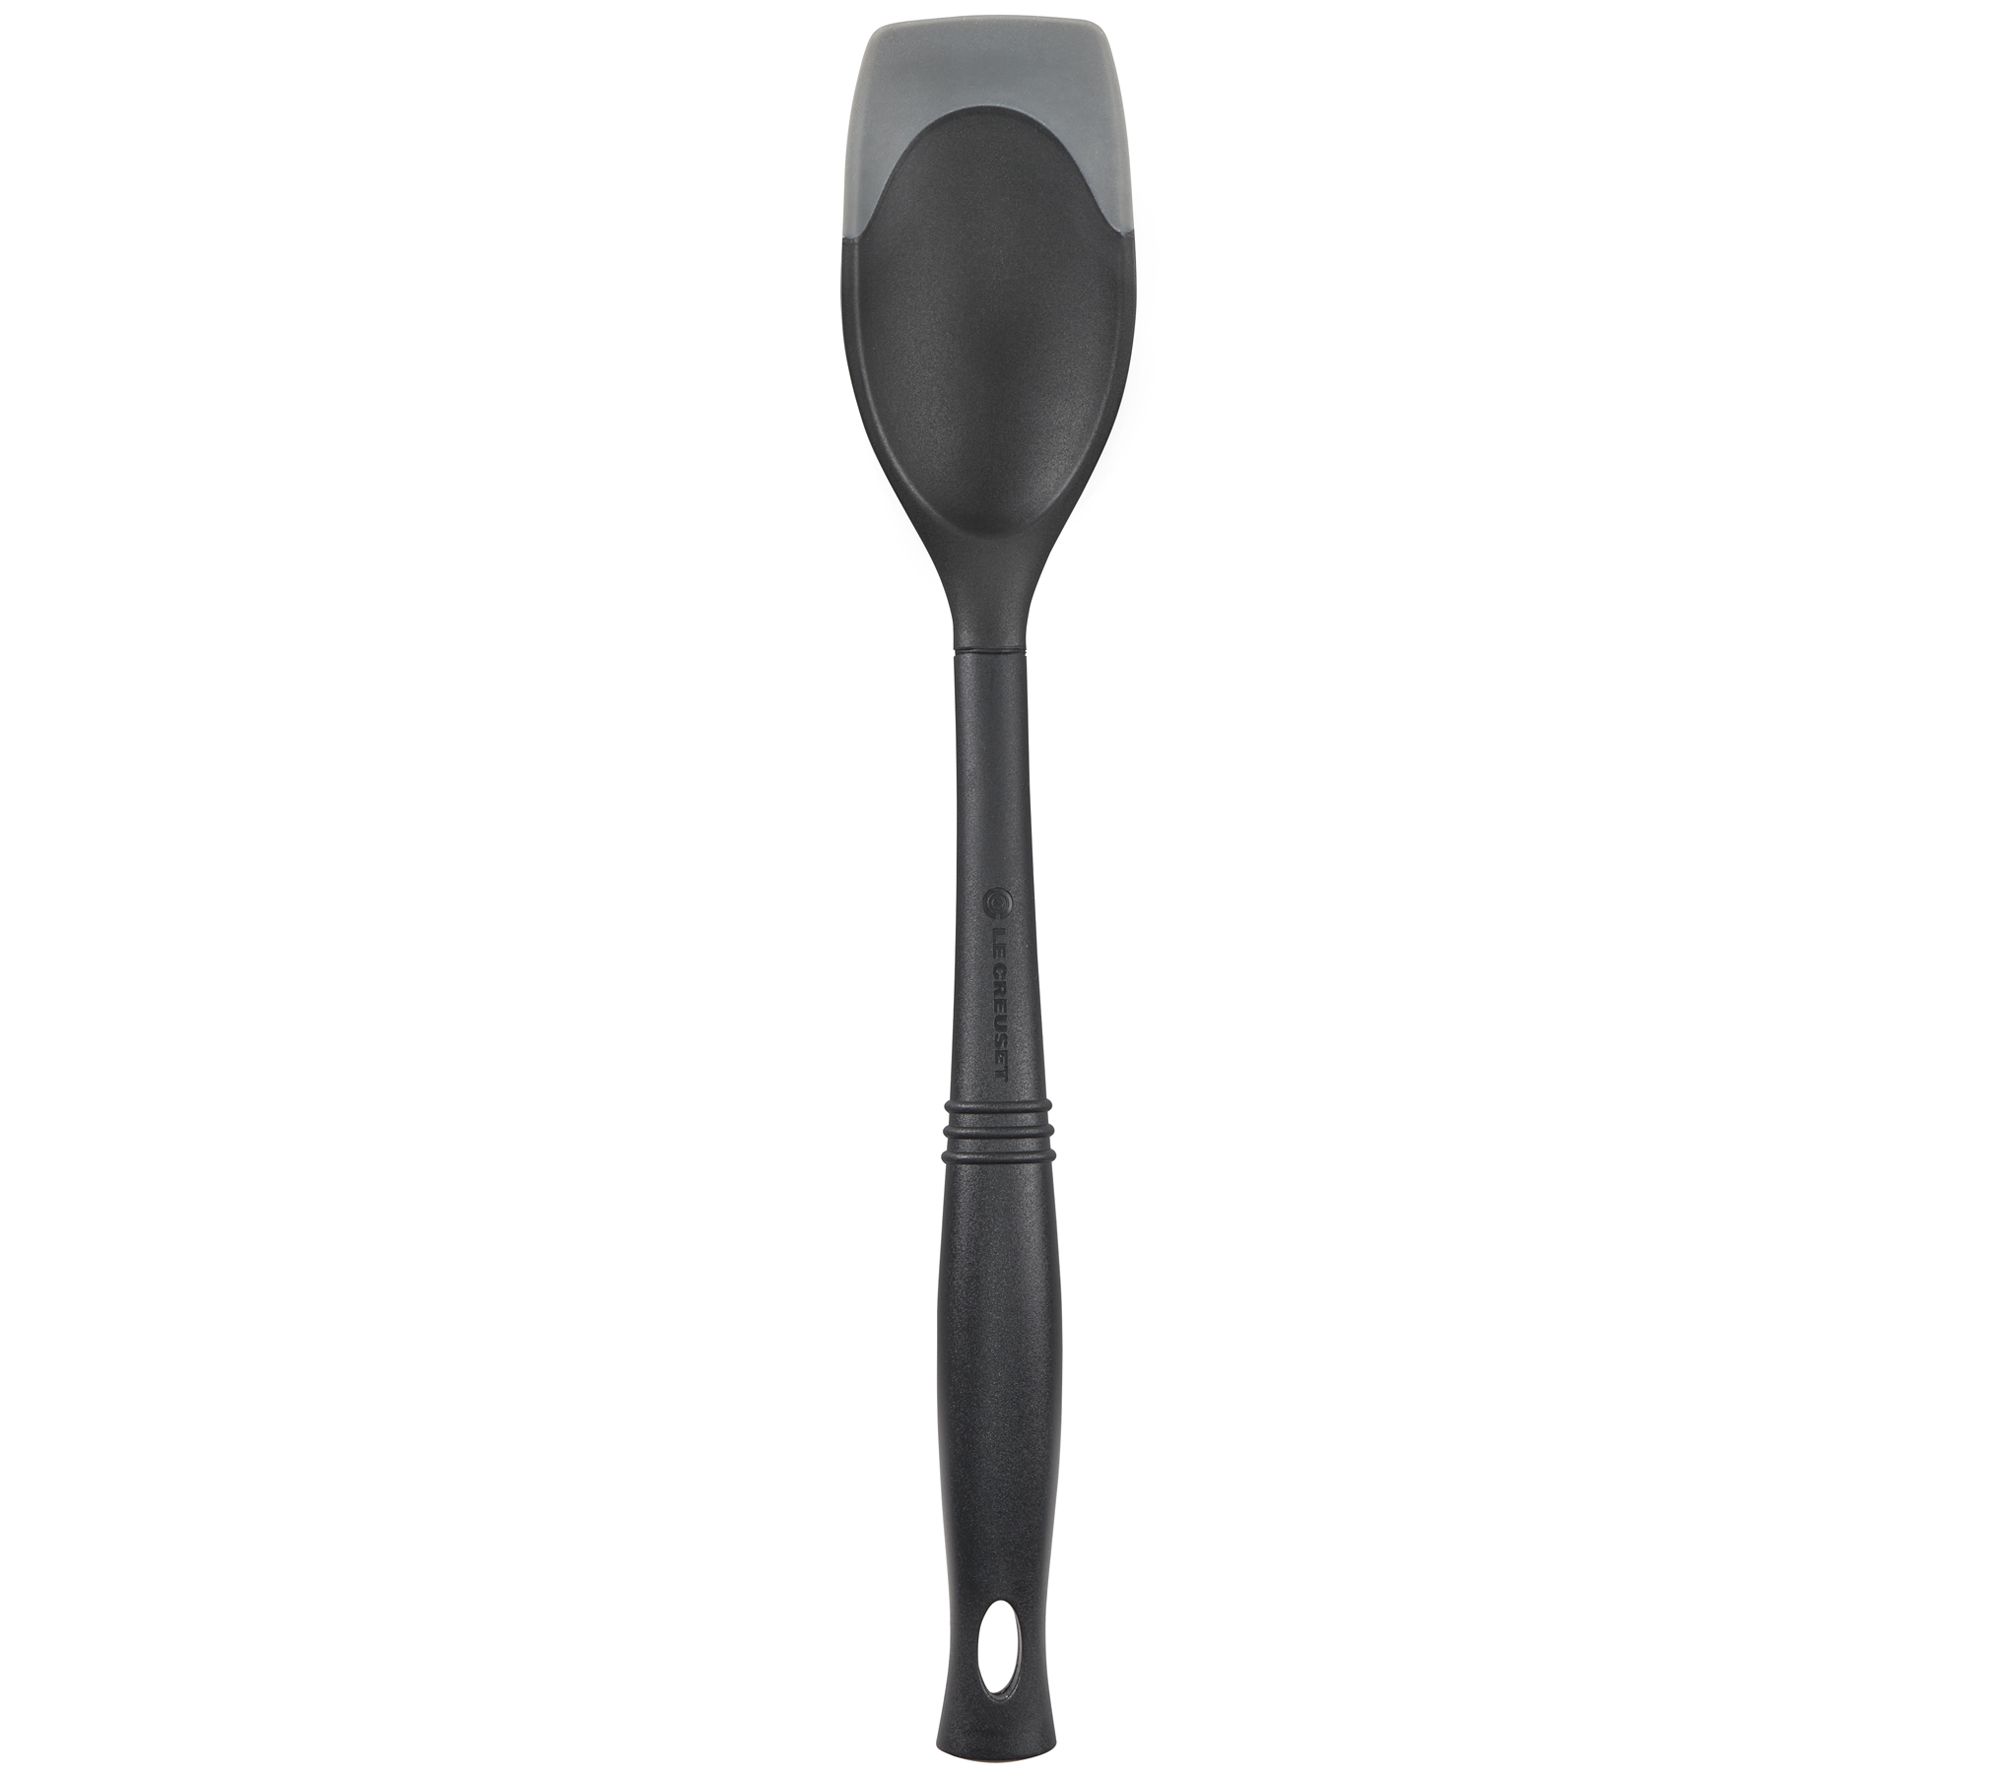 Le Creuset 6 Signature Spoon Rest - Oyster